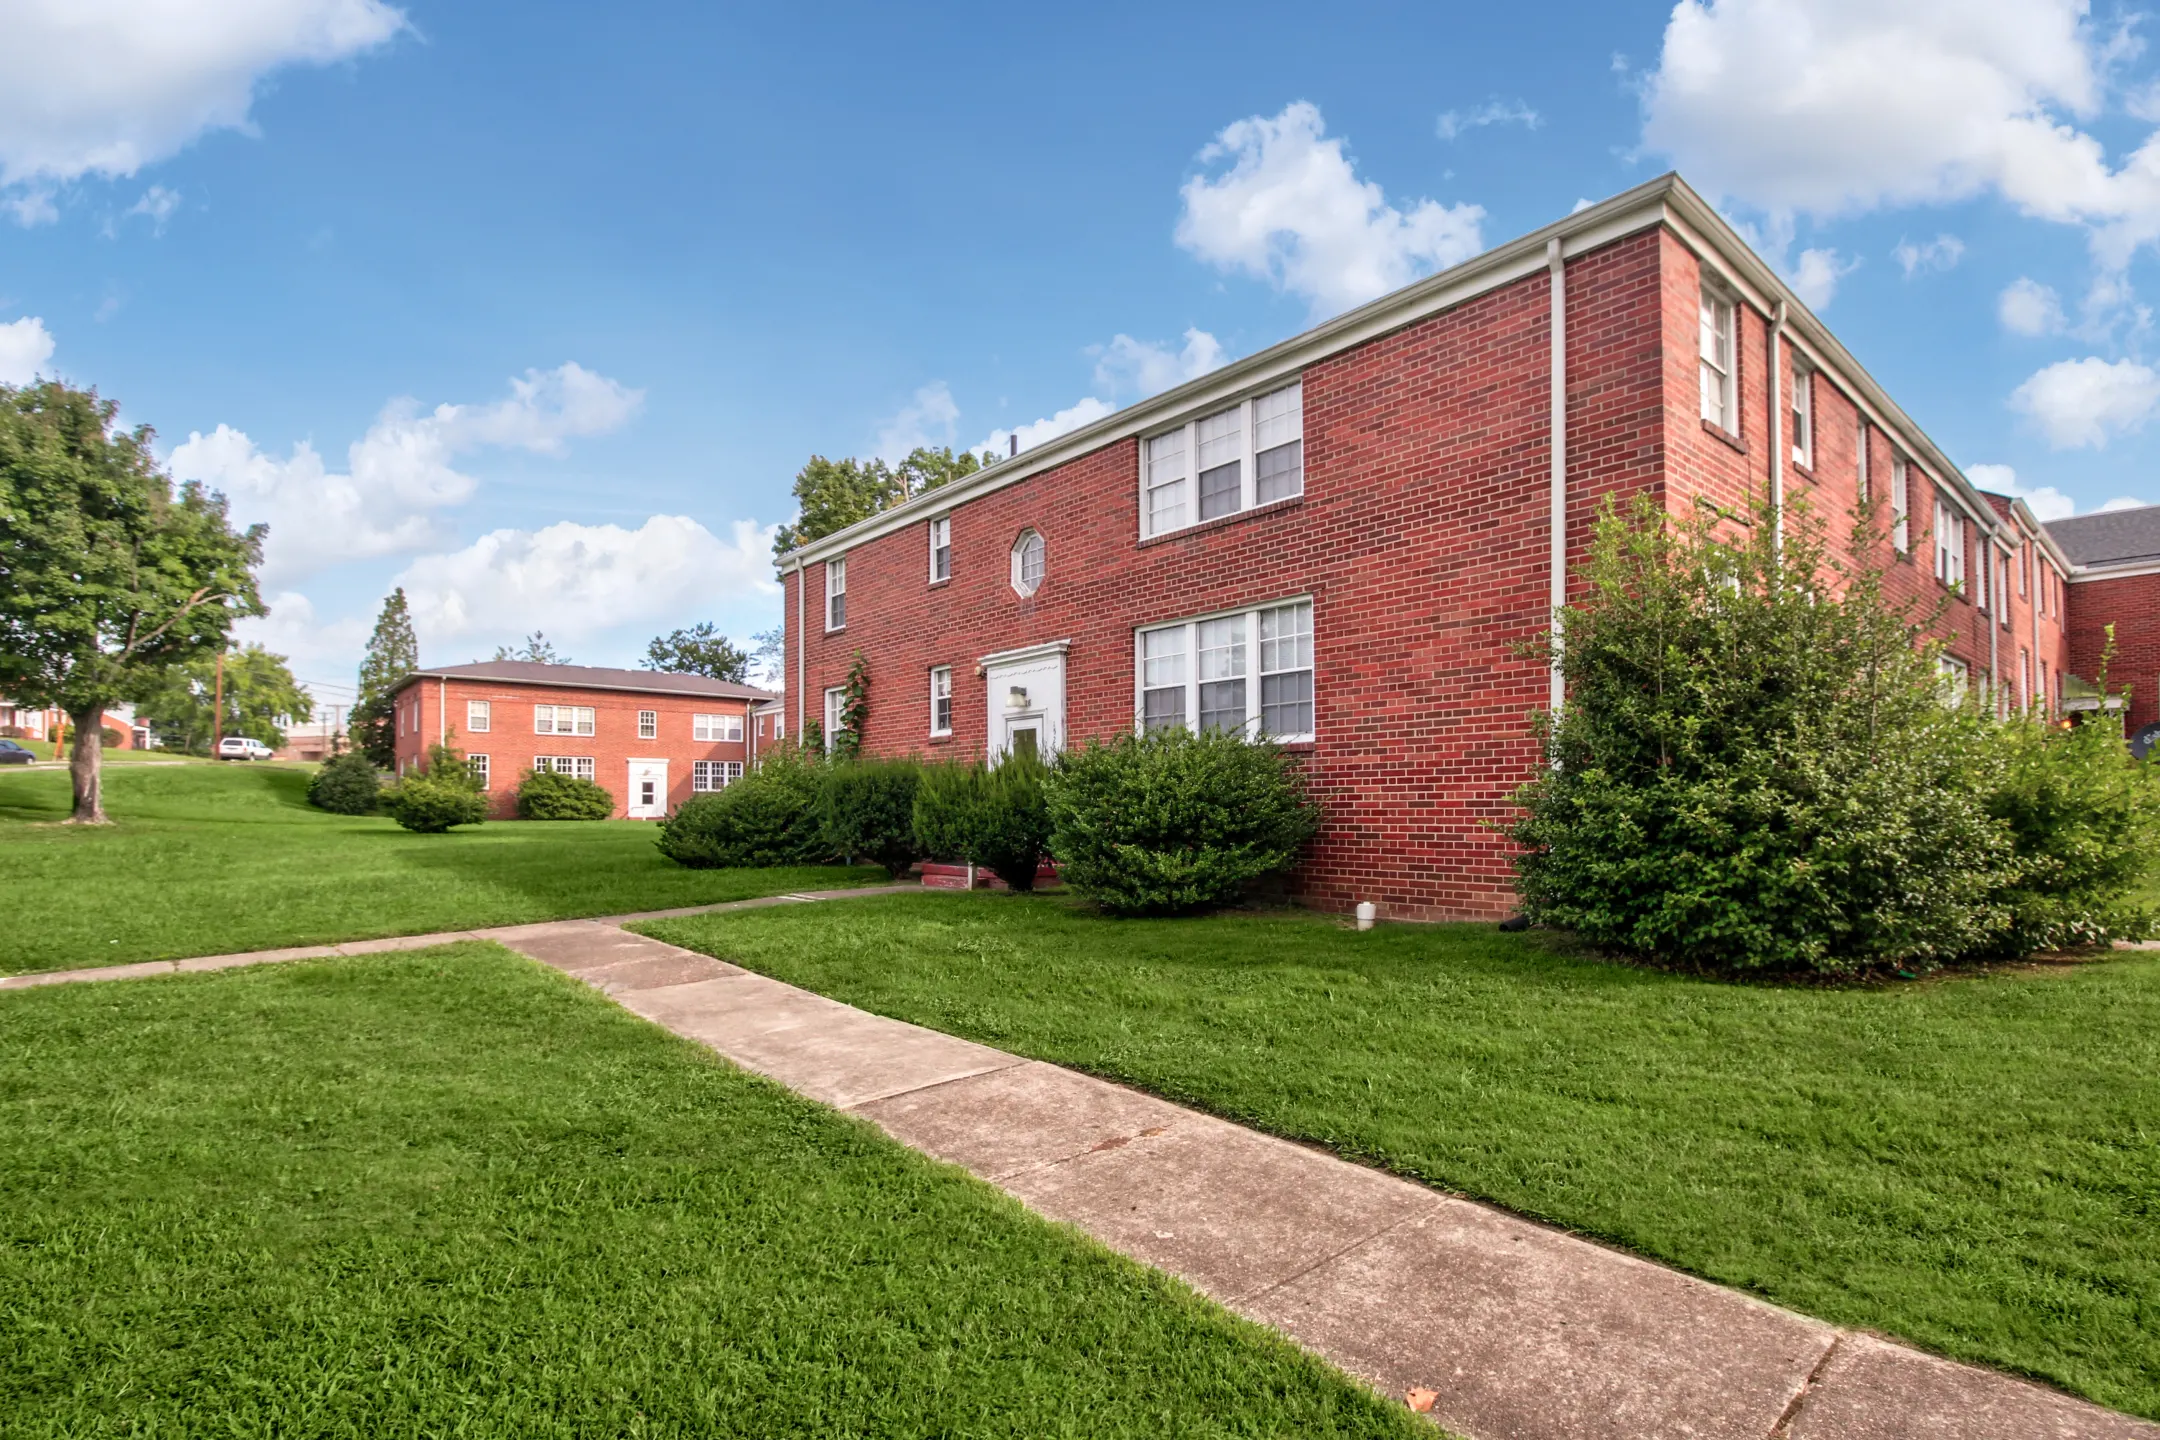 Building - The Gardens Apartments - Kingsport, TN